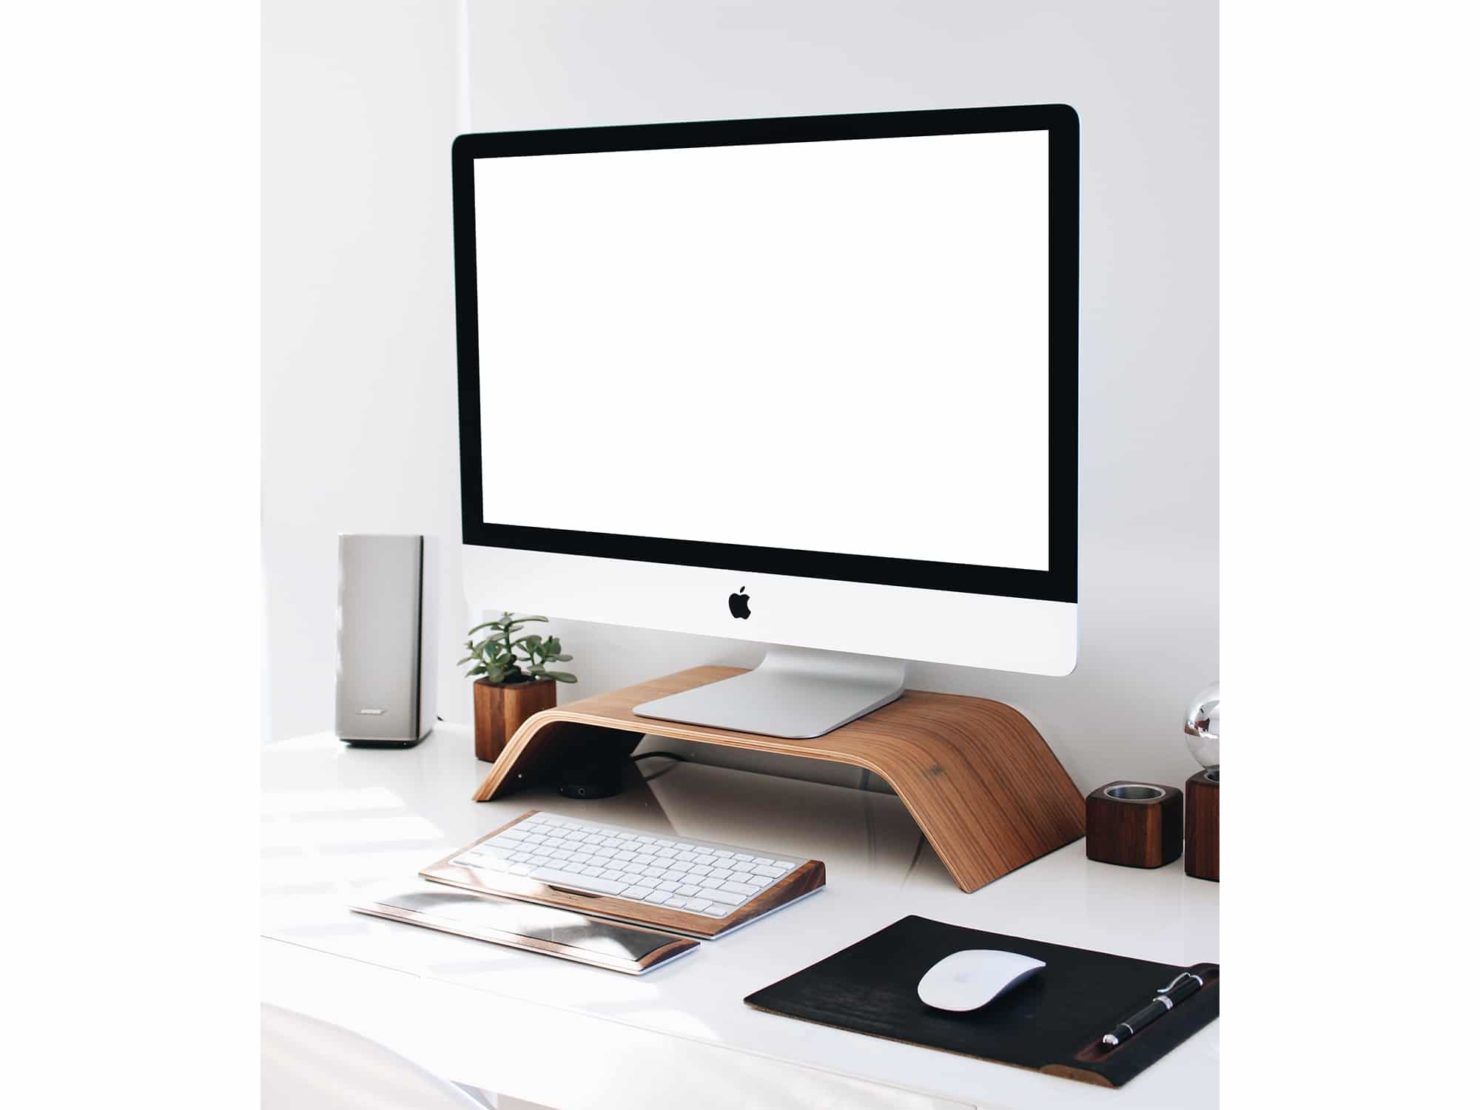 Download iMac on Wooden Monitor Stand Mockup | The Mockup Club